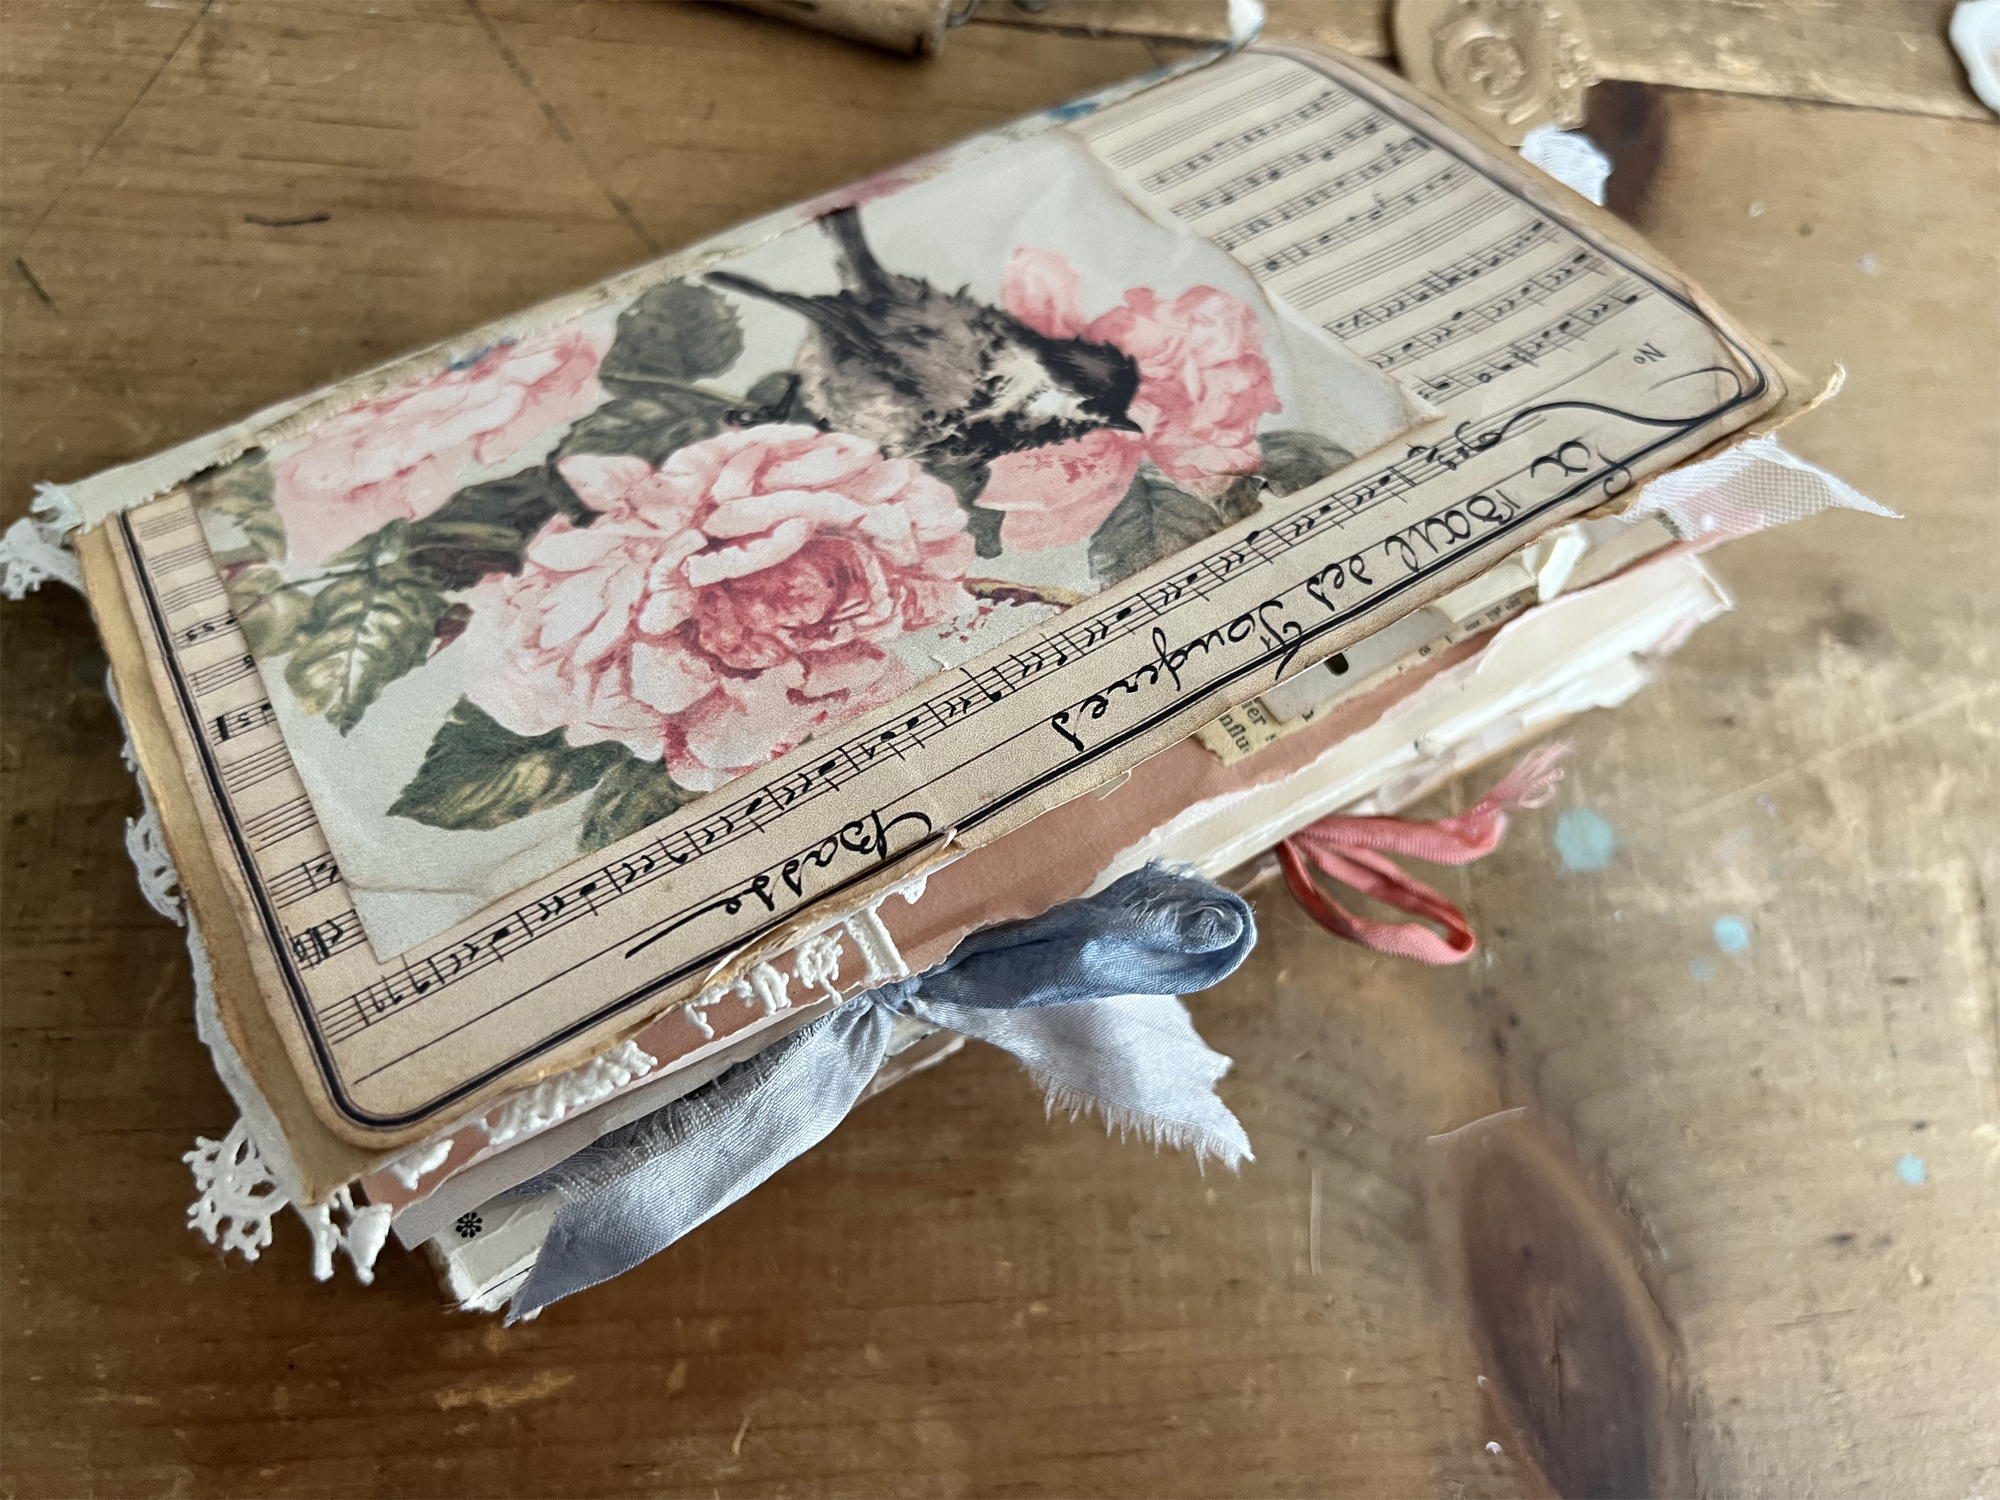 How to Wrap Flowers in Brown Paper! - The Graphics Fairy